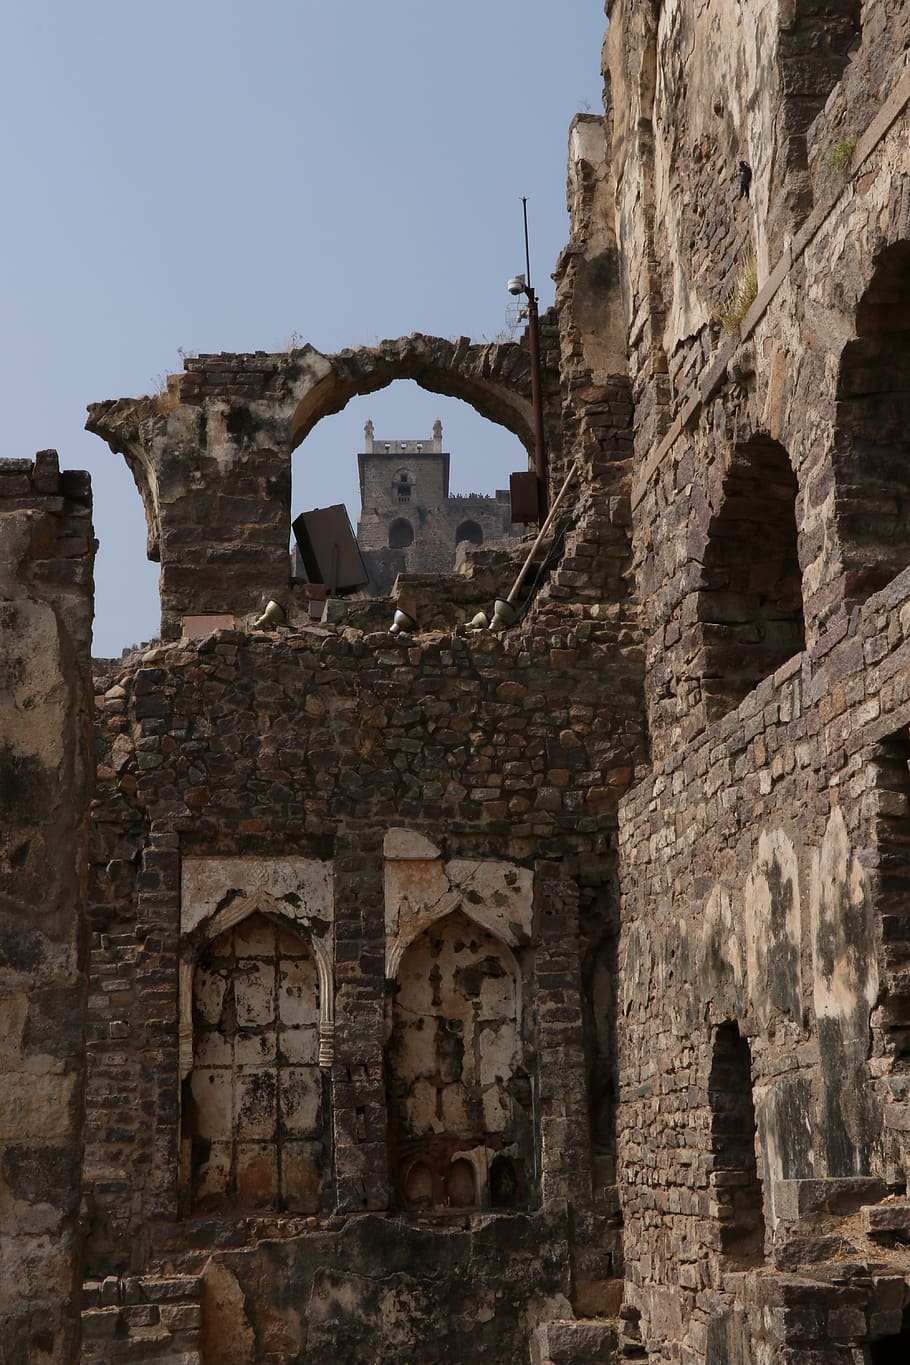 golconda fort, architecture, hyderabad, india, history, the past, built structure, old ruin, old, ancient